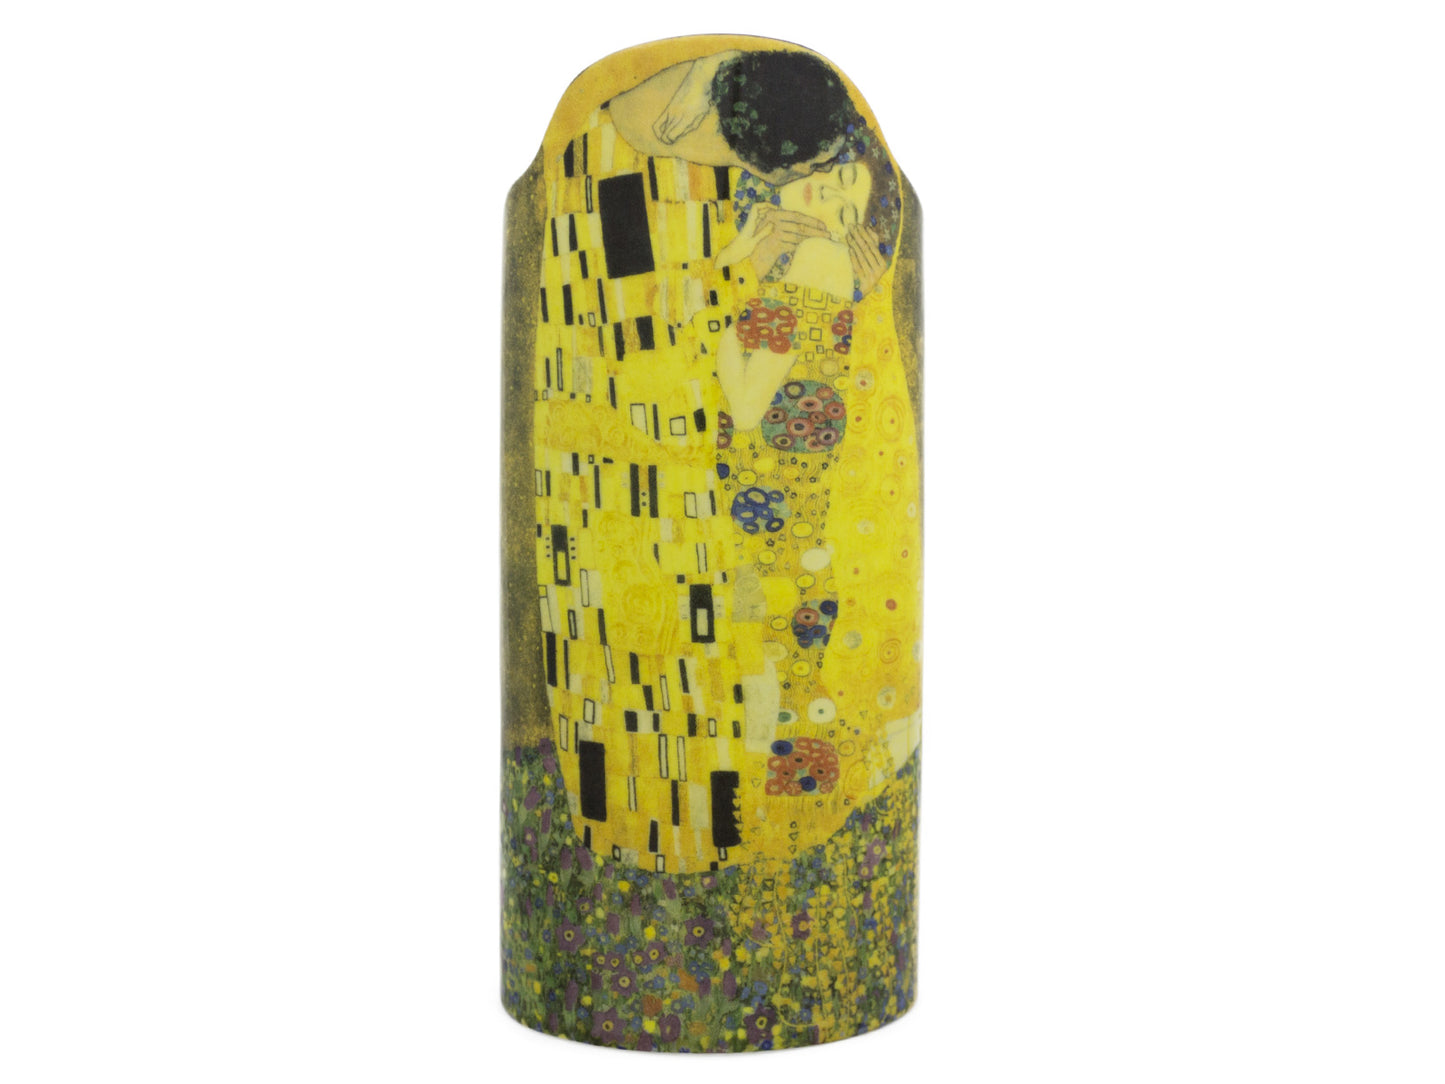 A porcelain vase that has been printed with a depiction of Klimt's painting 'The Kiss'. The vase is decorated with a flurry of flowers and a couple which are blended amongst them in yellows and browns sharing a loving exchange. The top edge of the vase is irregular in shape as it as a risen lip to account for the couples heads.